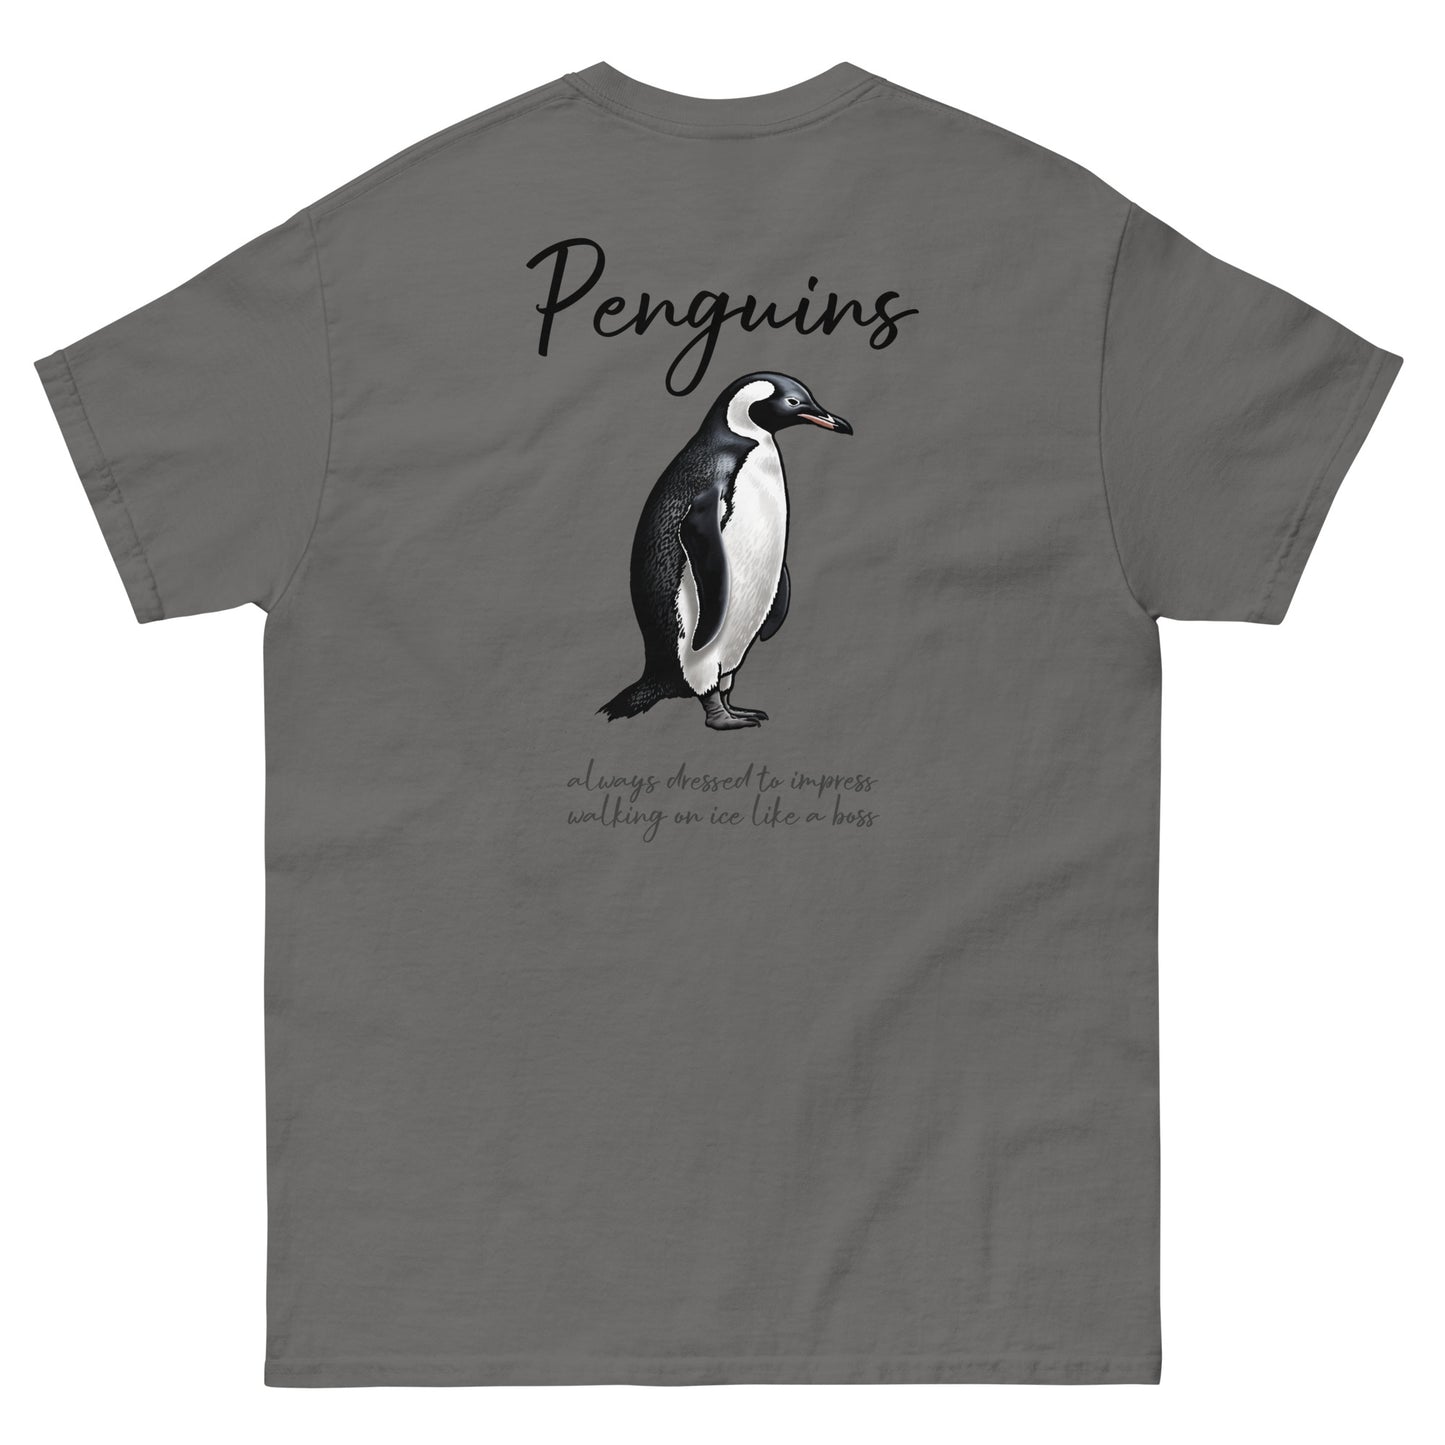 Dark Gray High Quality Tee - Front Design with a Penguin on left chest - Back Design with a Penguin and a Phrase "Penguins:always dressed to impress, walking on ice like a boss" print